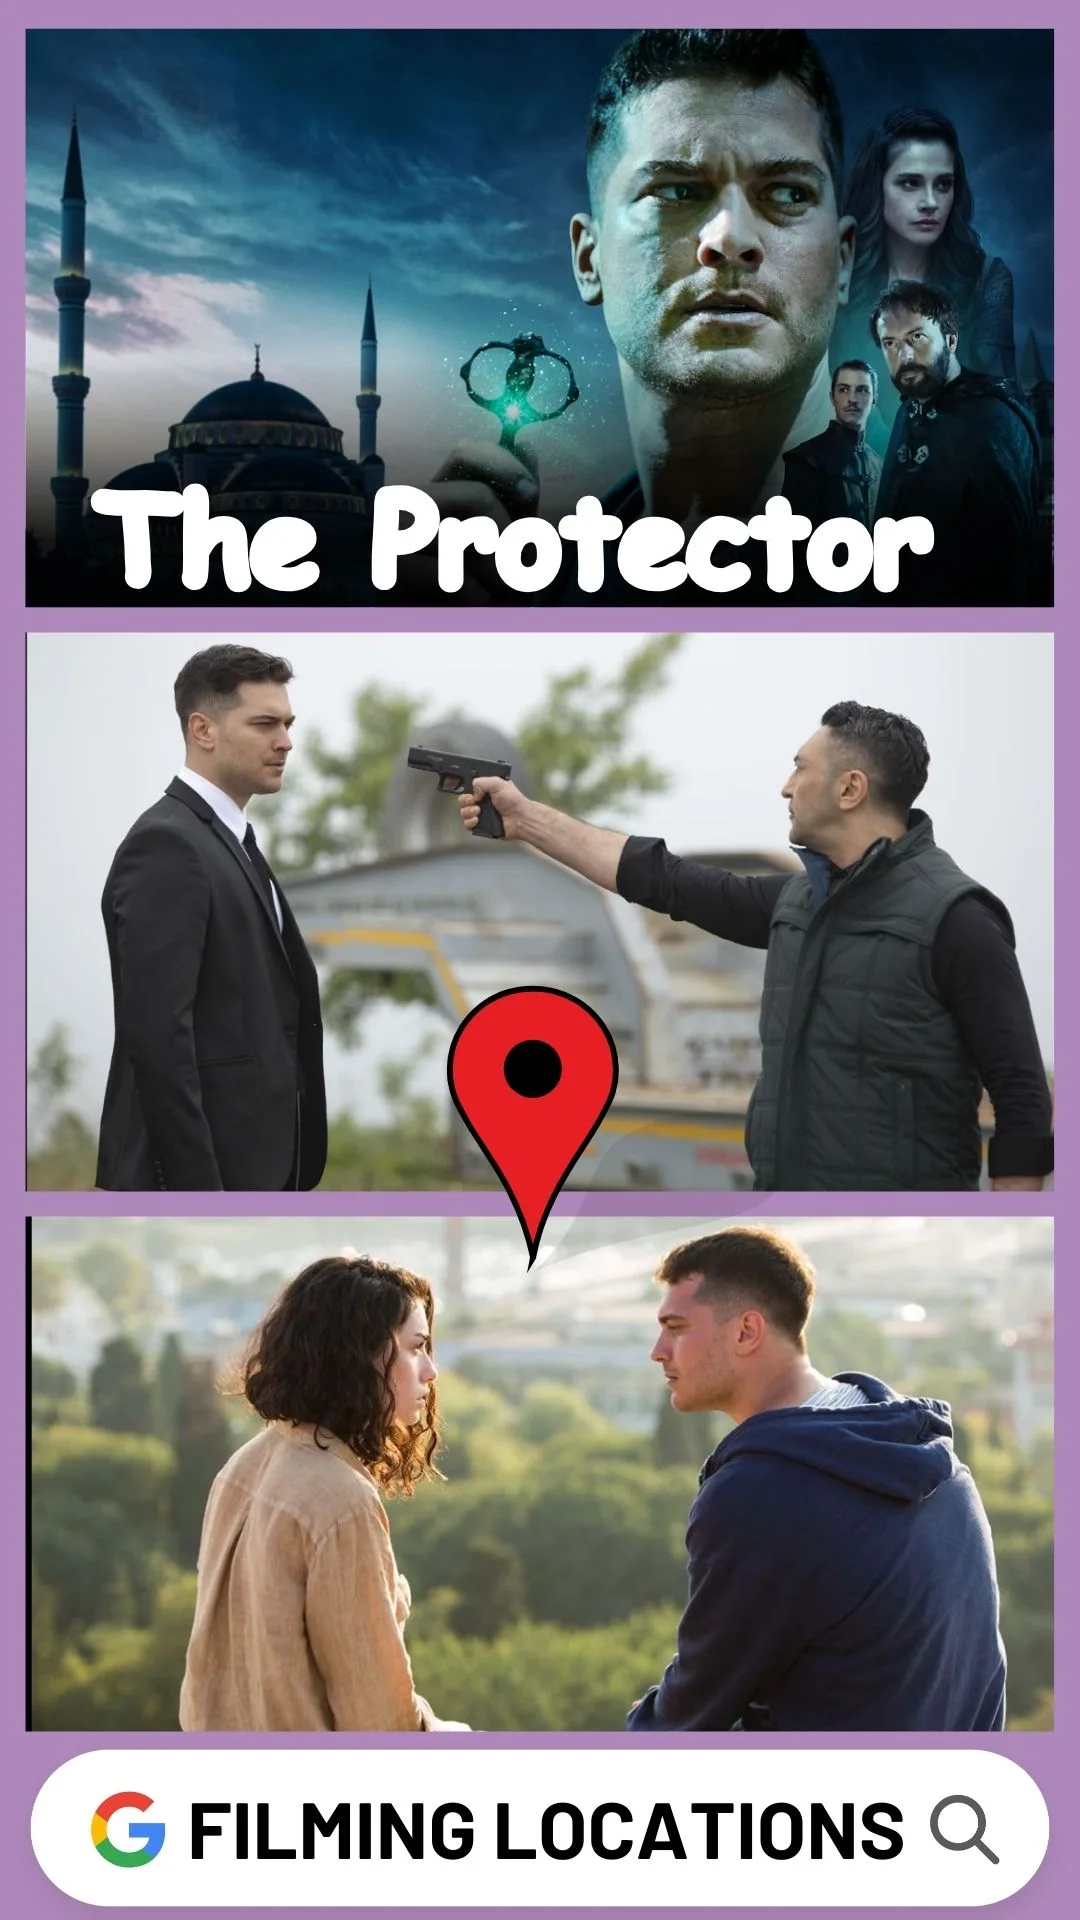 The Protector Filming Locations